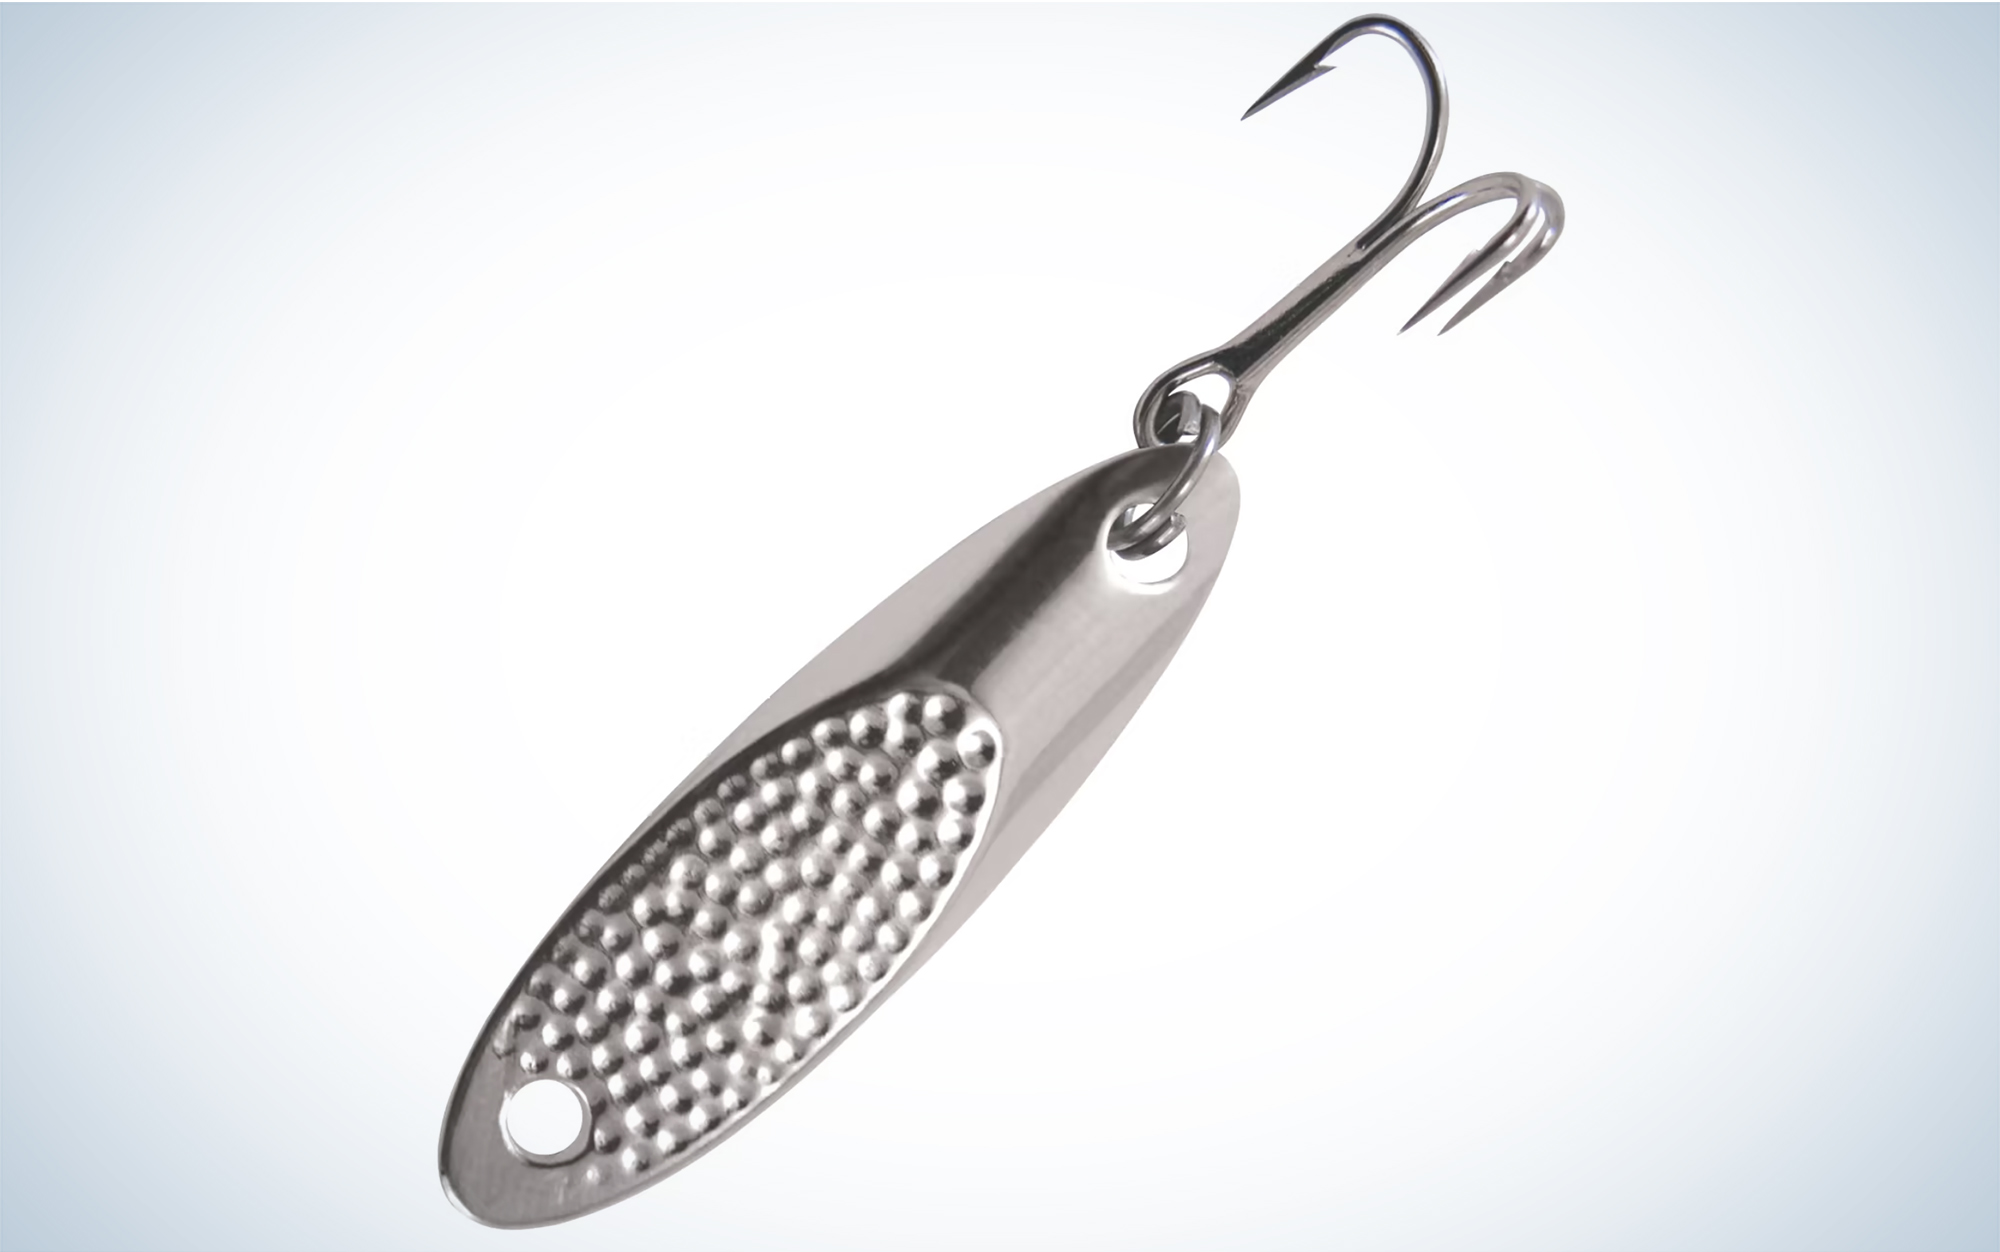 The Acme Kastmaster is one of the best walleye ice fishing lures.